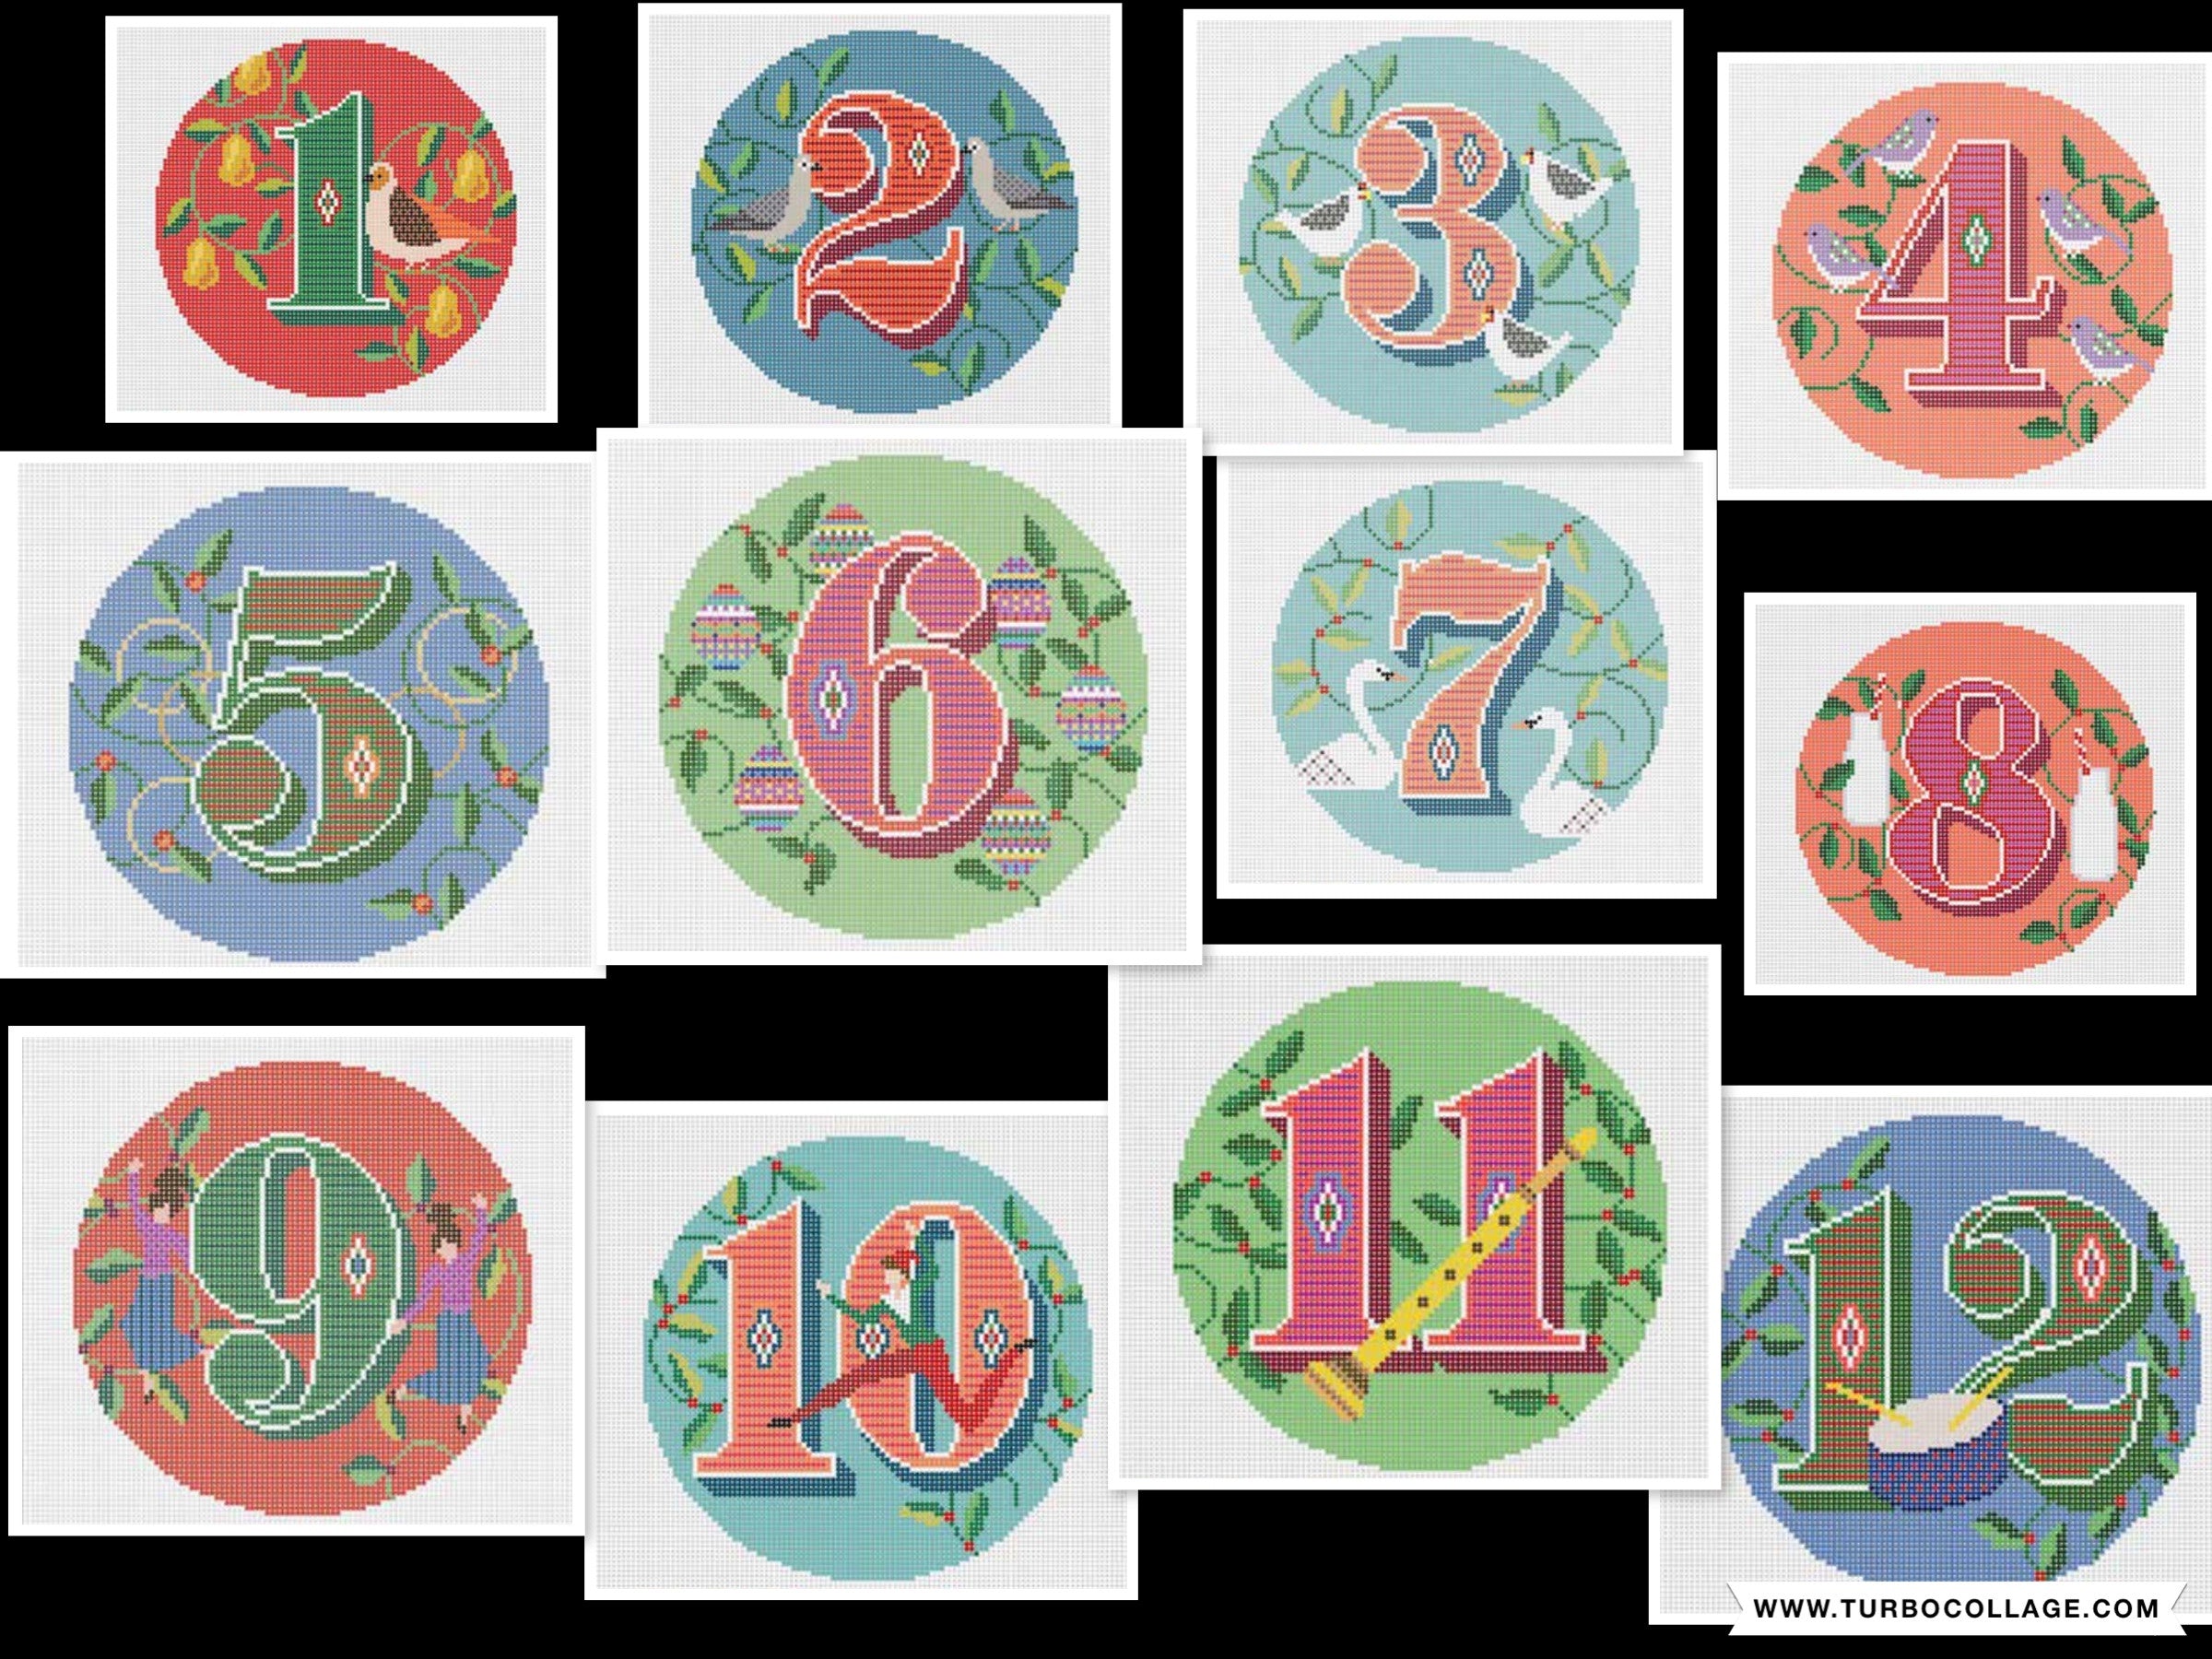 Wipstitch 12 days of Christmas ornaments